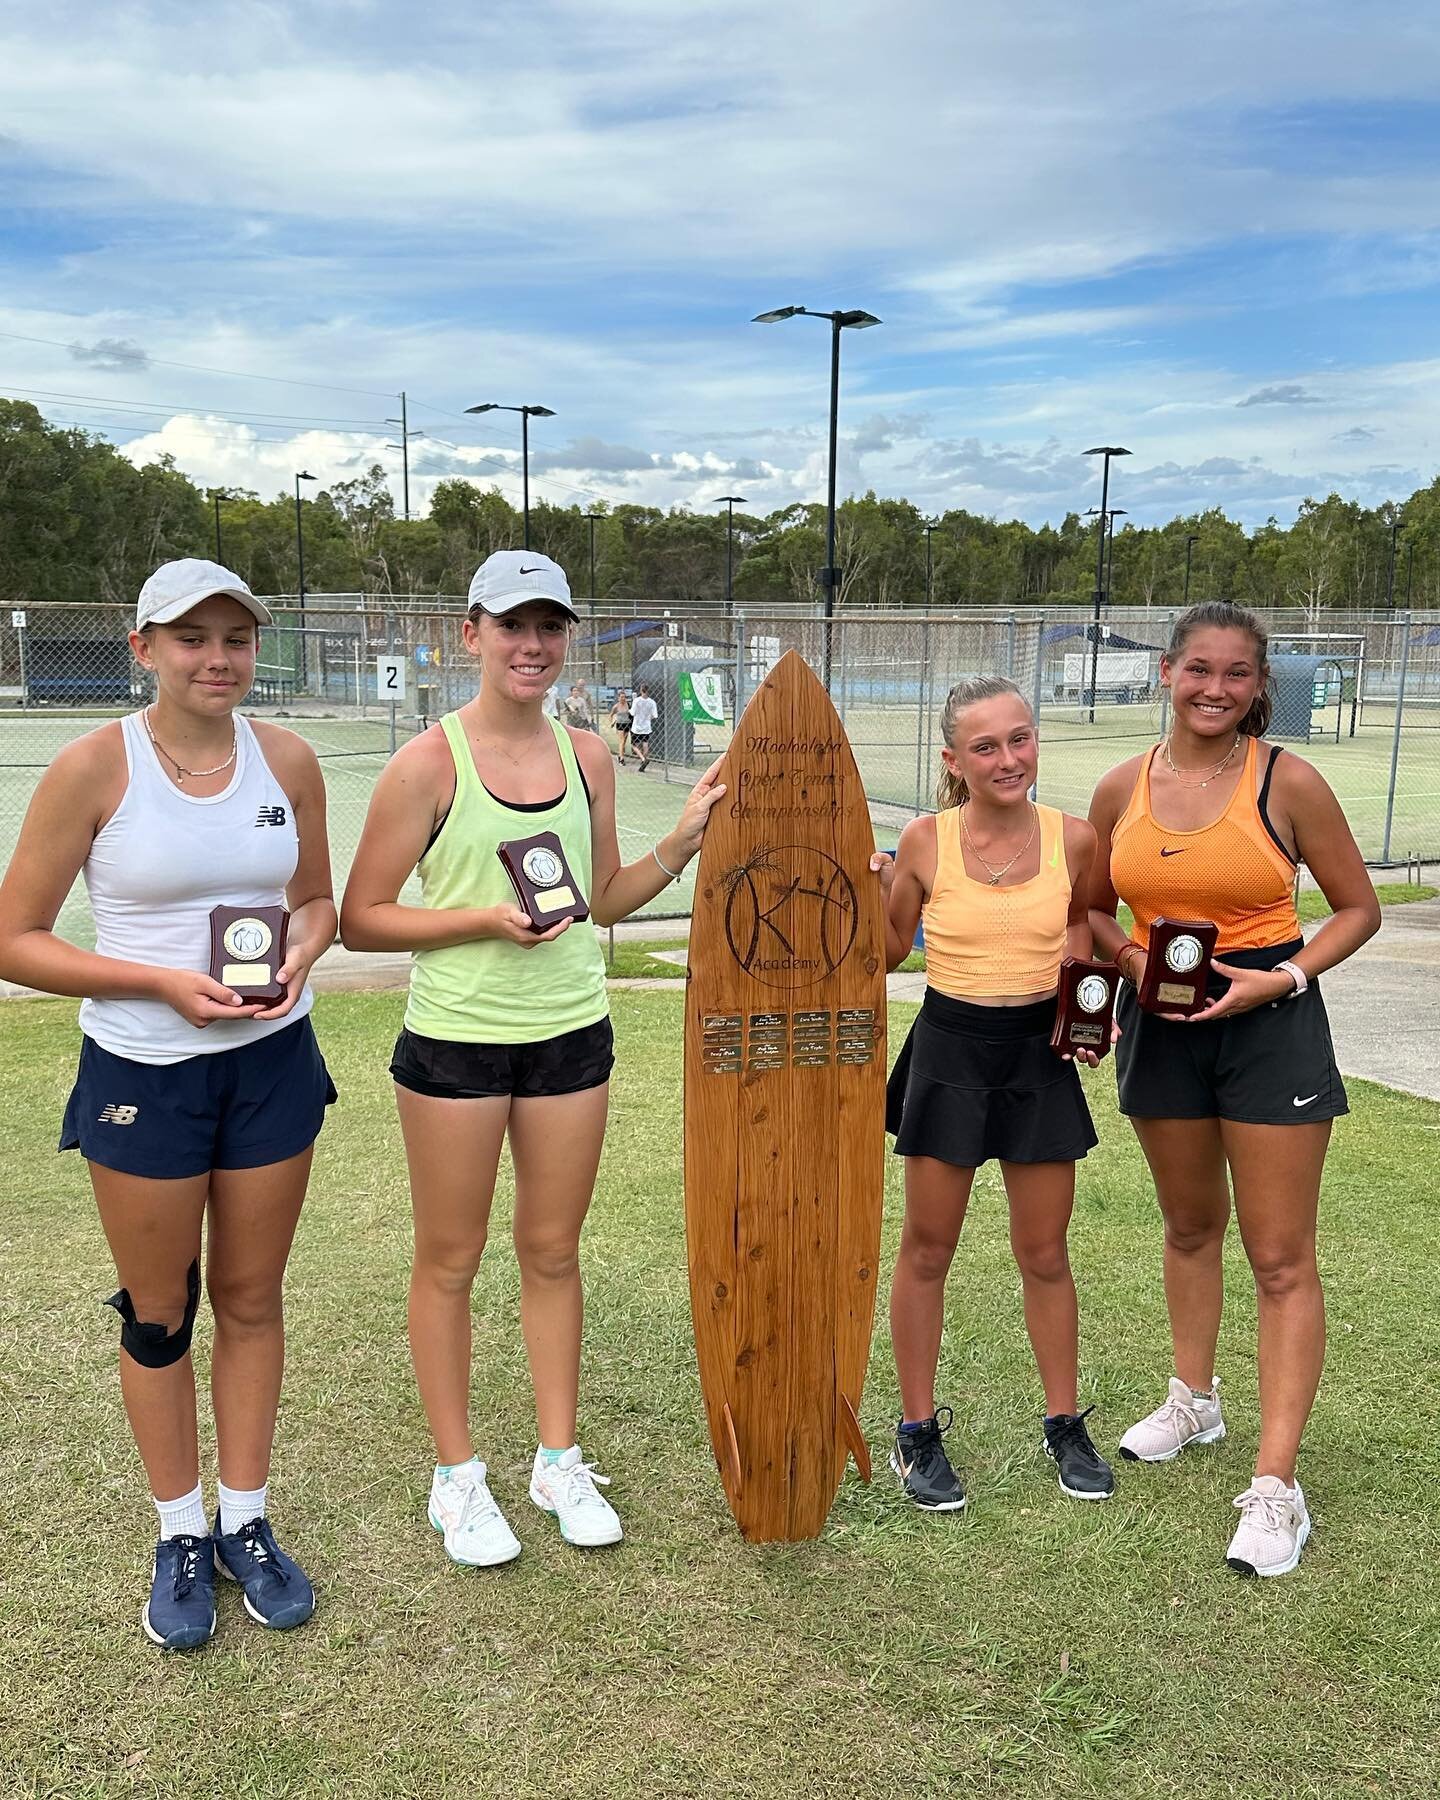 2023 Mooloolaba Open Completed! 
Congratulations to all winners and thank you to all players who supported our event this year. 
@tennisqld @tennisaustralia